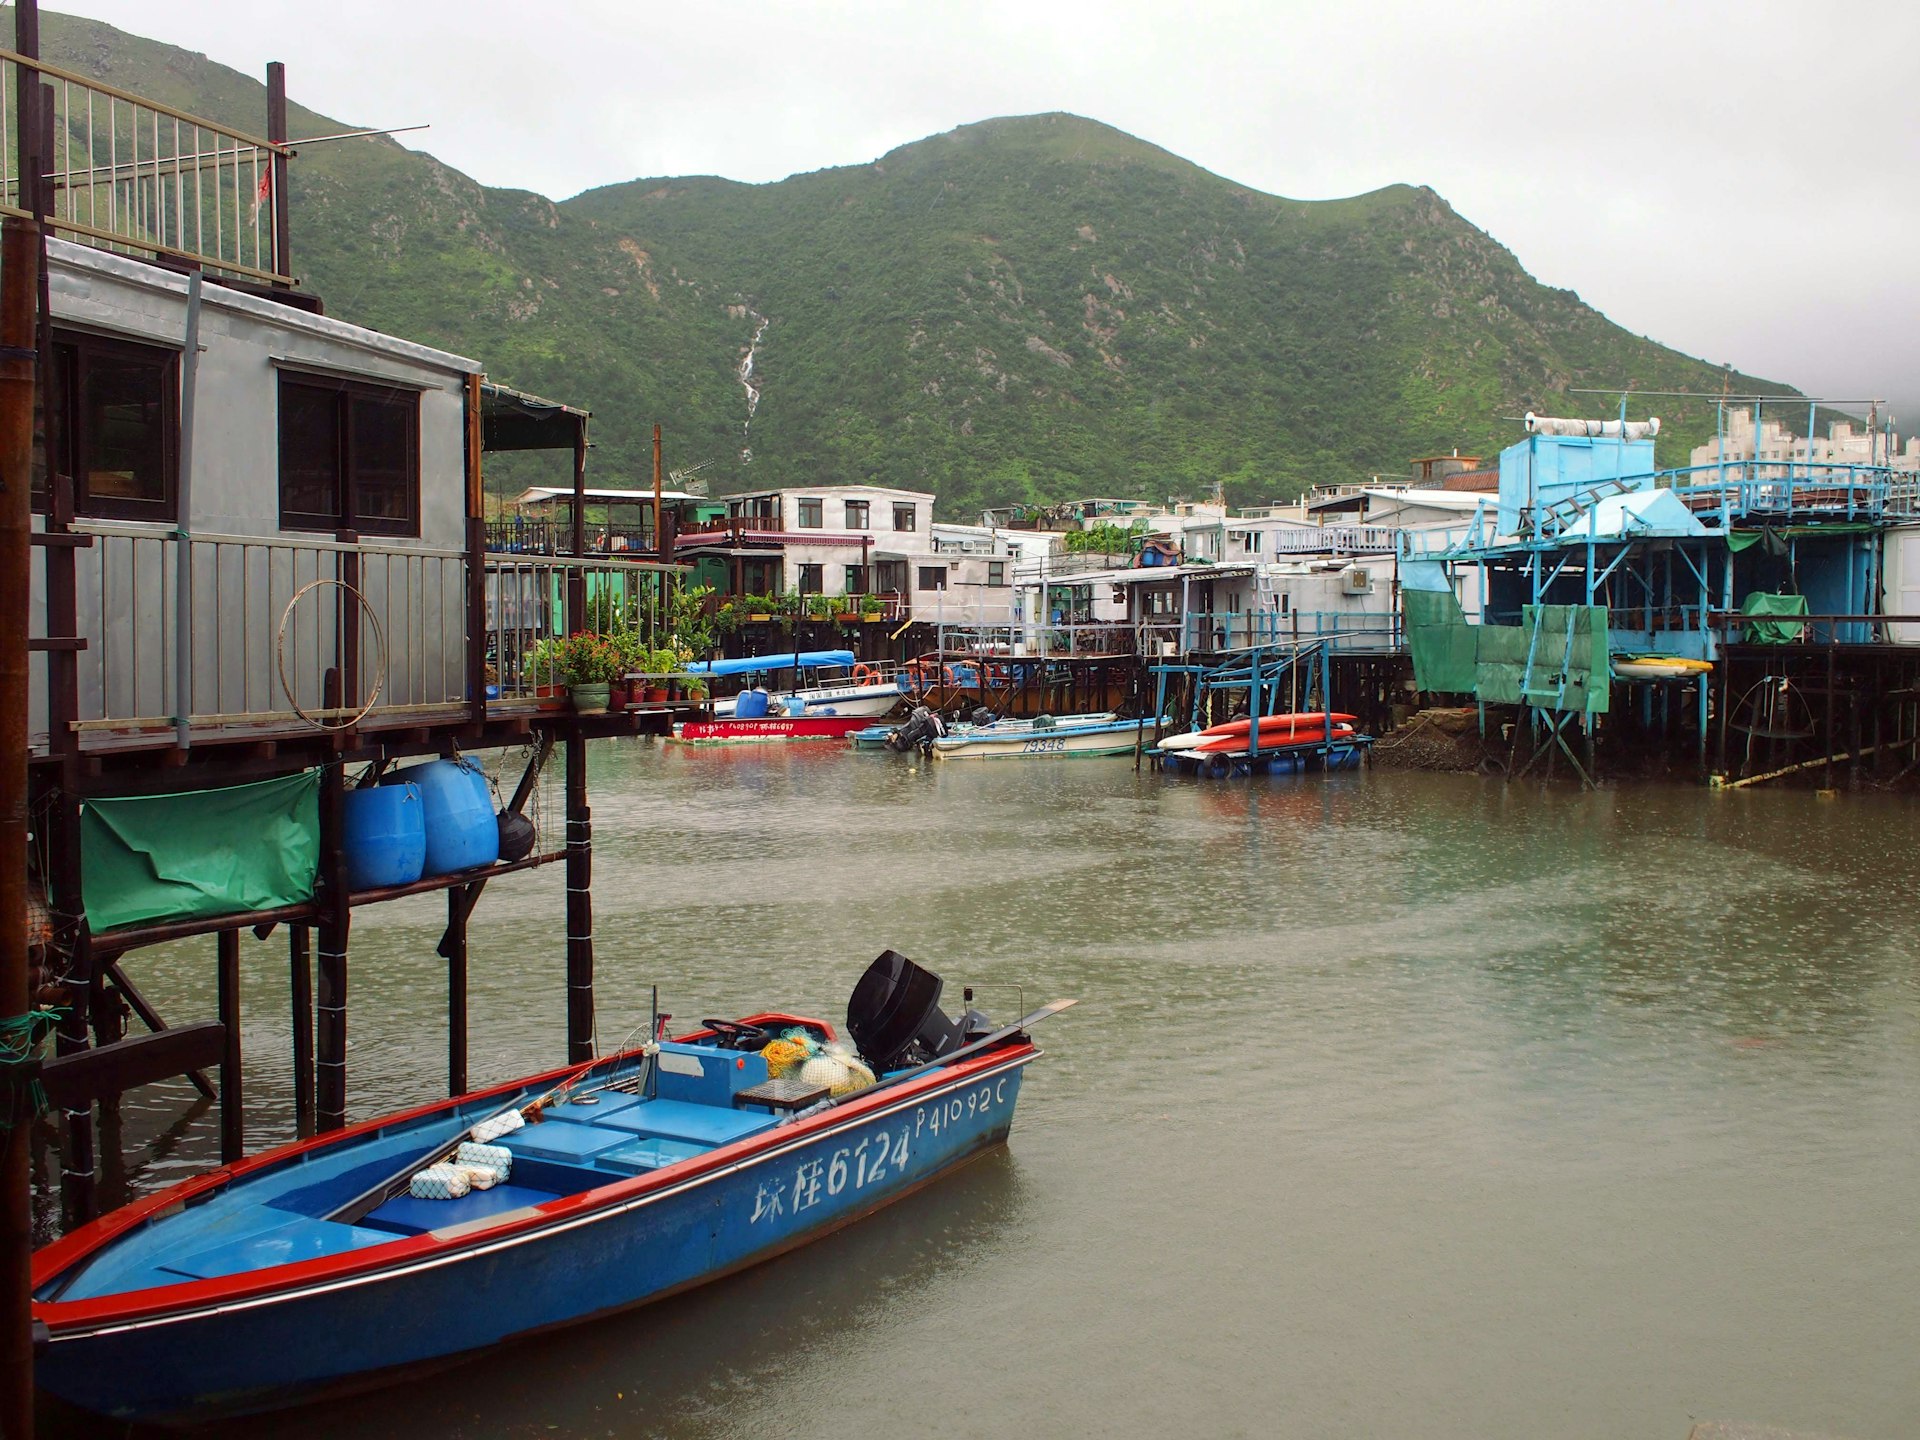 Blue boats sit on a waterway below stilt houses and green mountains